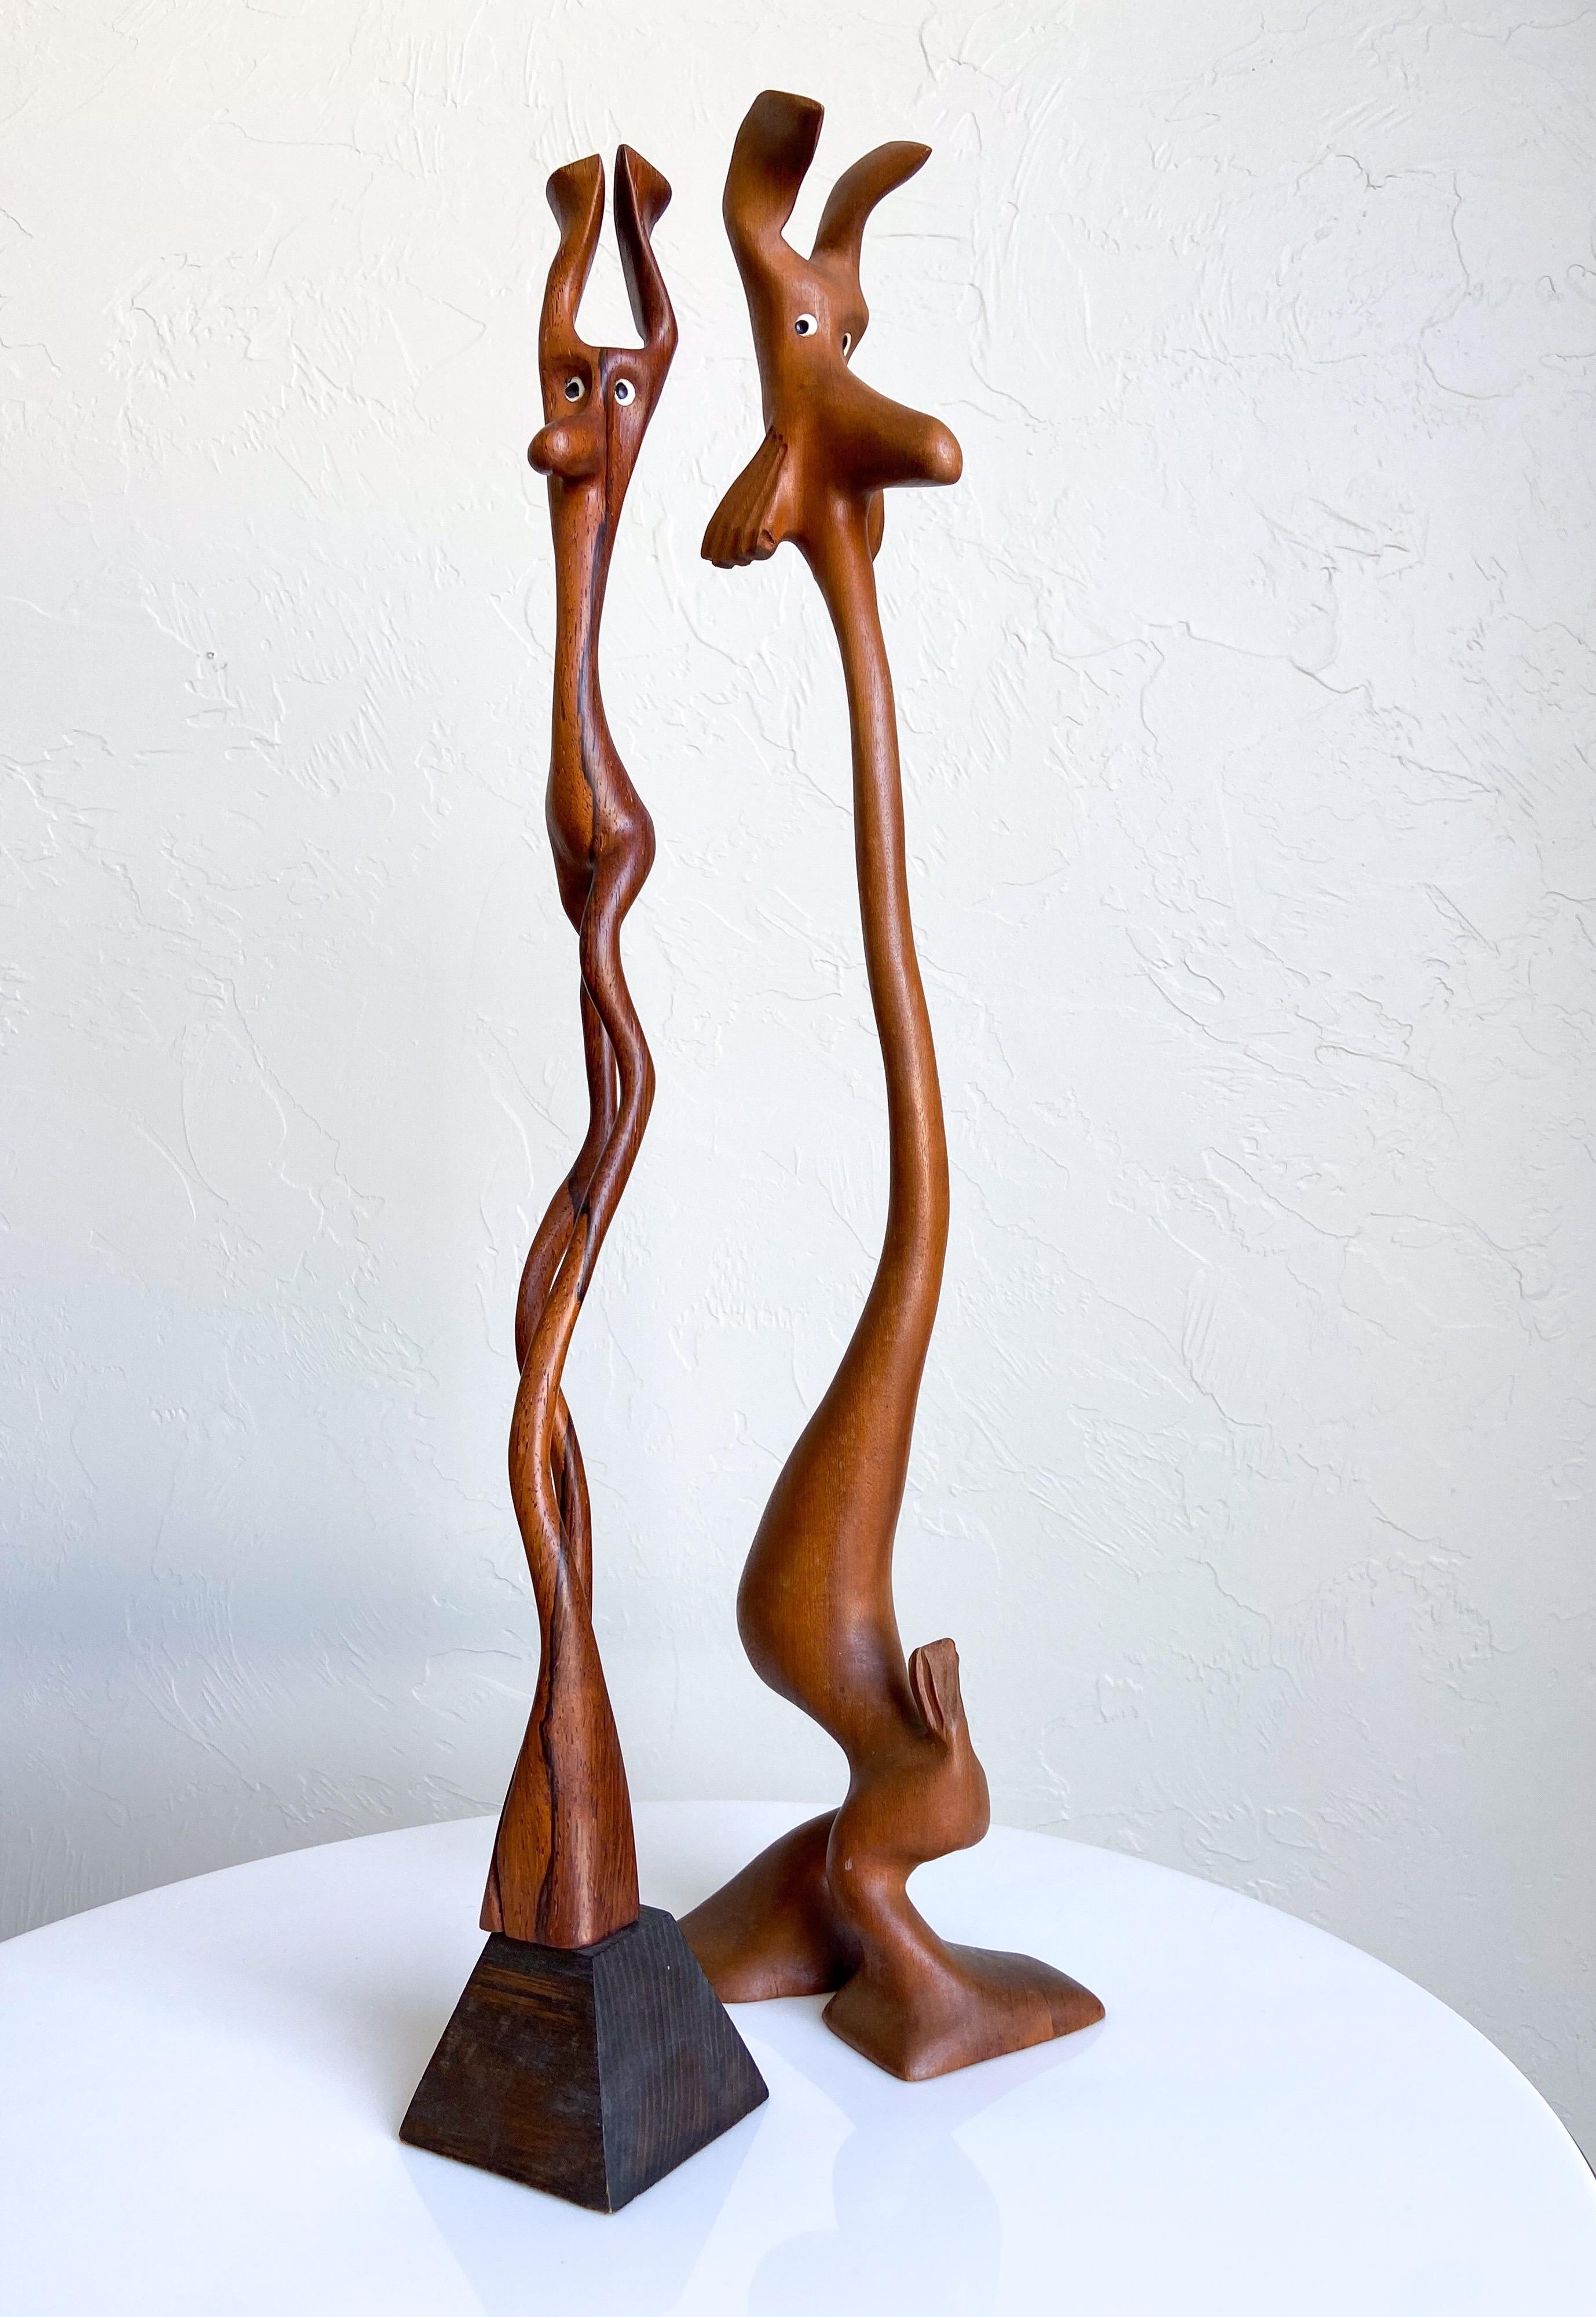 A rare pair of hand carved, organic, abstract animal sculptures by Knud Albert. Each figure is carved from a single piece of wood. All are unique and one of a kind.